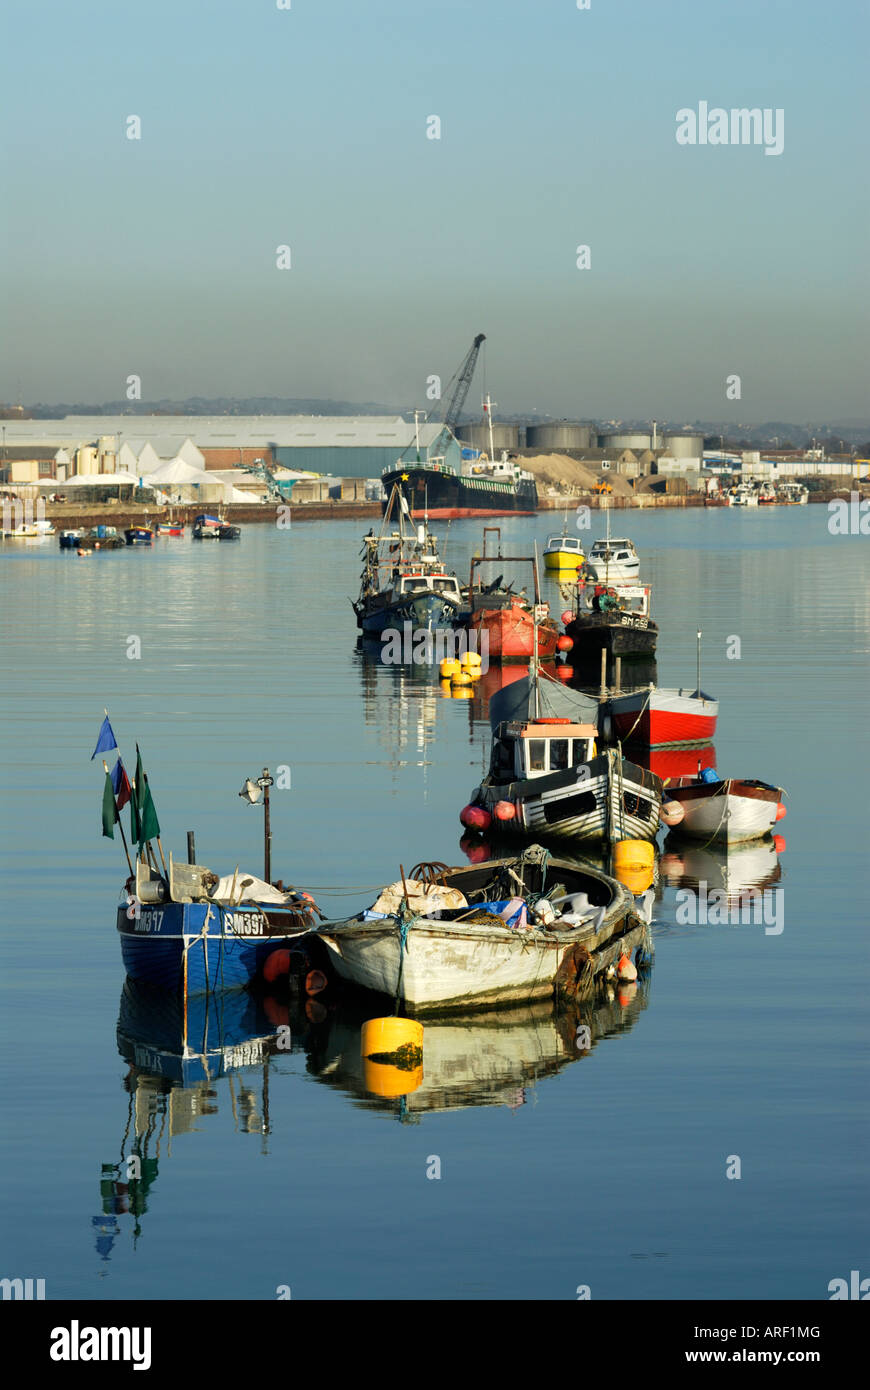 Fishing boats moored at Shoreham on the river Adur. Part of Shoreham port and cargo freighter in background Stock Photo